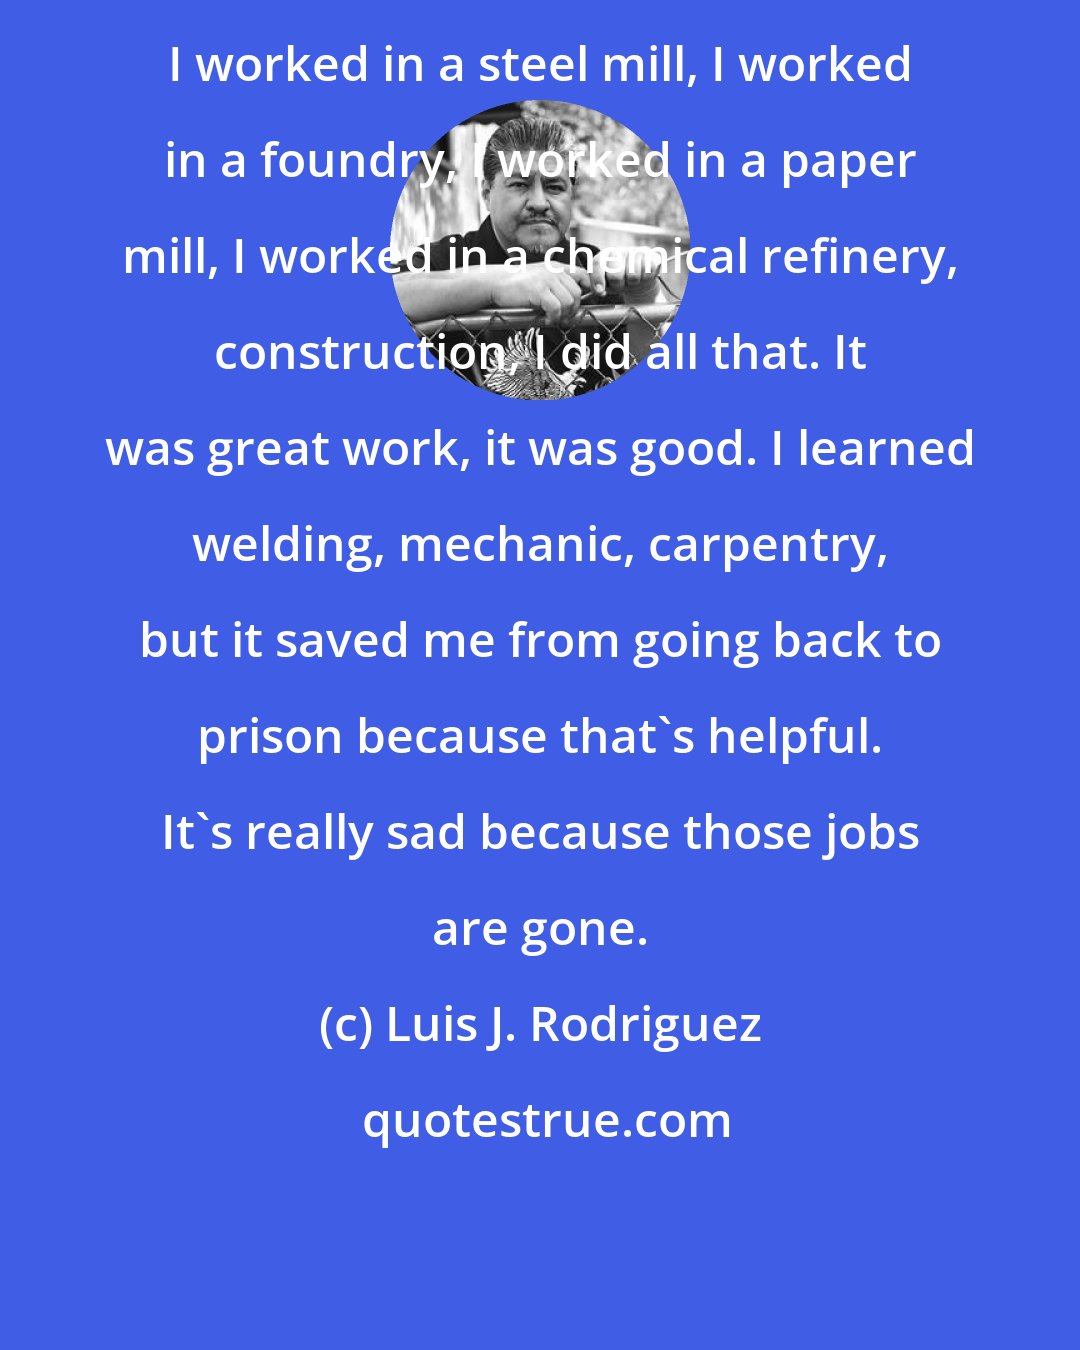 Luis J. Rodriguez: I worked in a steel mill, I worked in a foundry, I worked in a paper mill, I worked in a chemical refinery, construction, I did all that. It was great work, it was good. I learned welding, mechanic, carpentry, but it saved me from going back to prison because that's helpful. It's really sad because those jobs are gone.